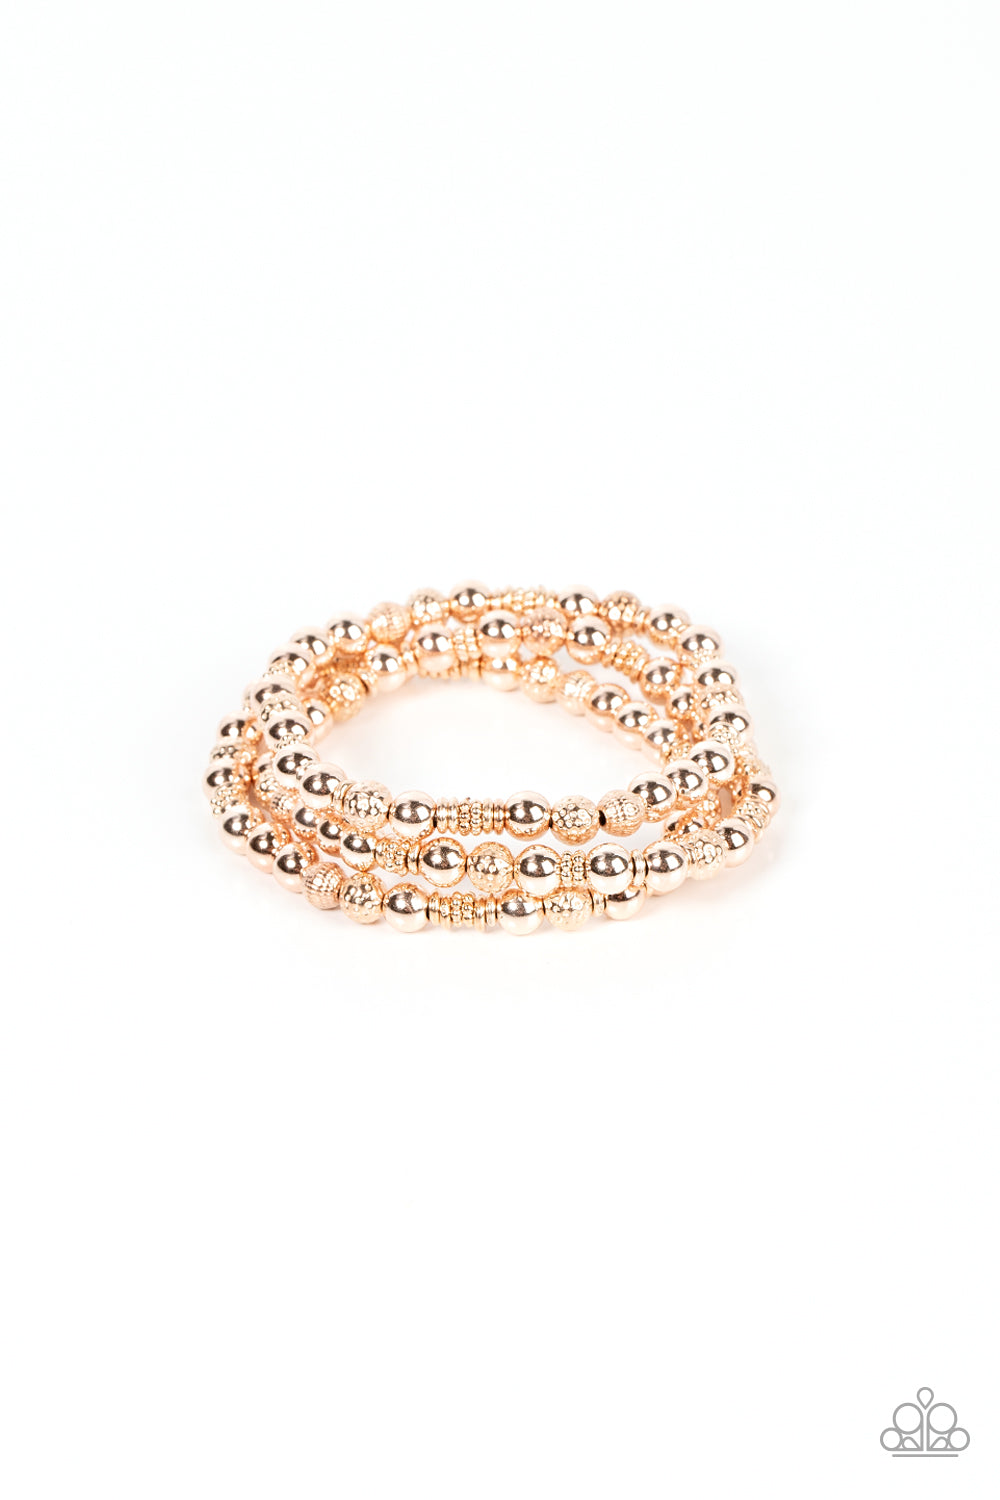 five-dollar-jewelry-boundless-boundaries-rose-gold-paparazzi-accessories